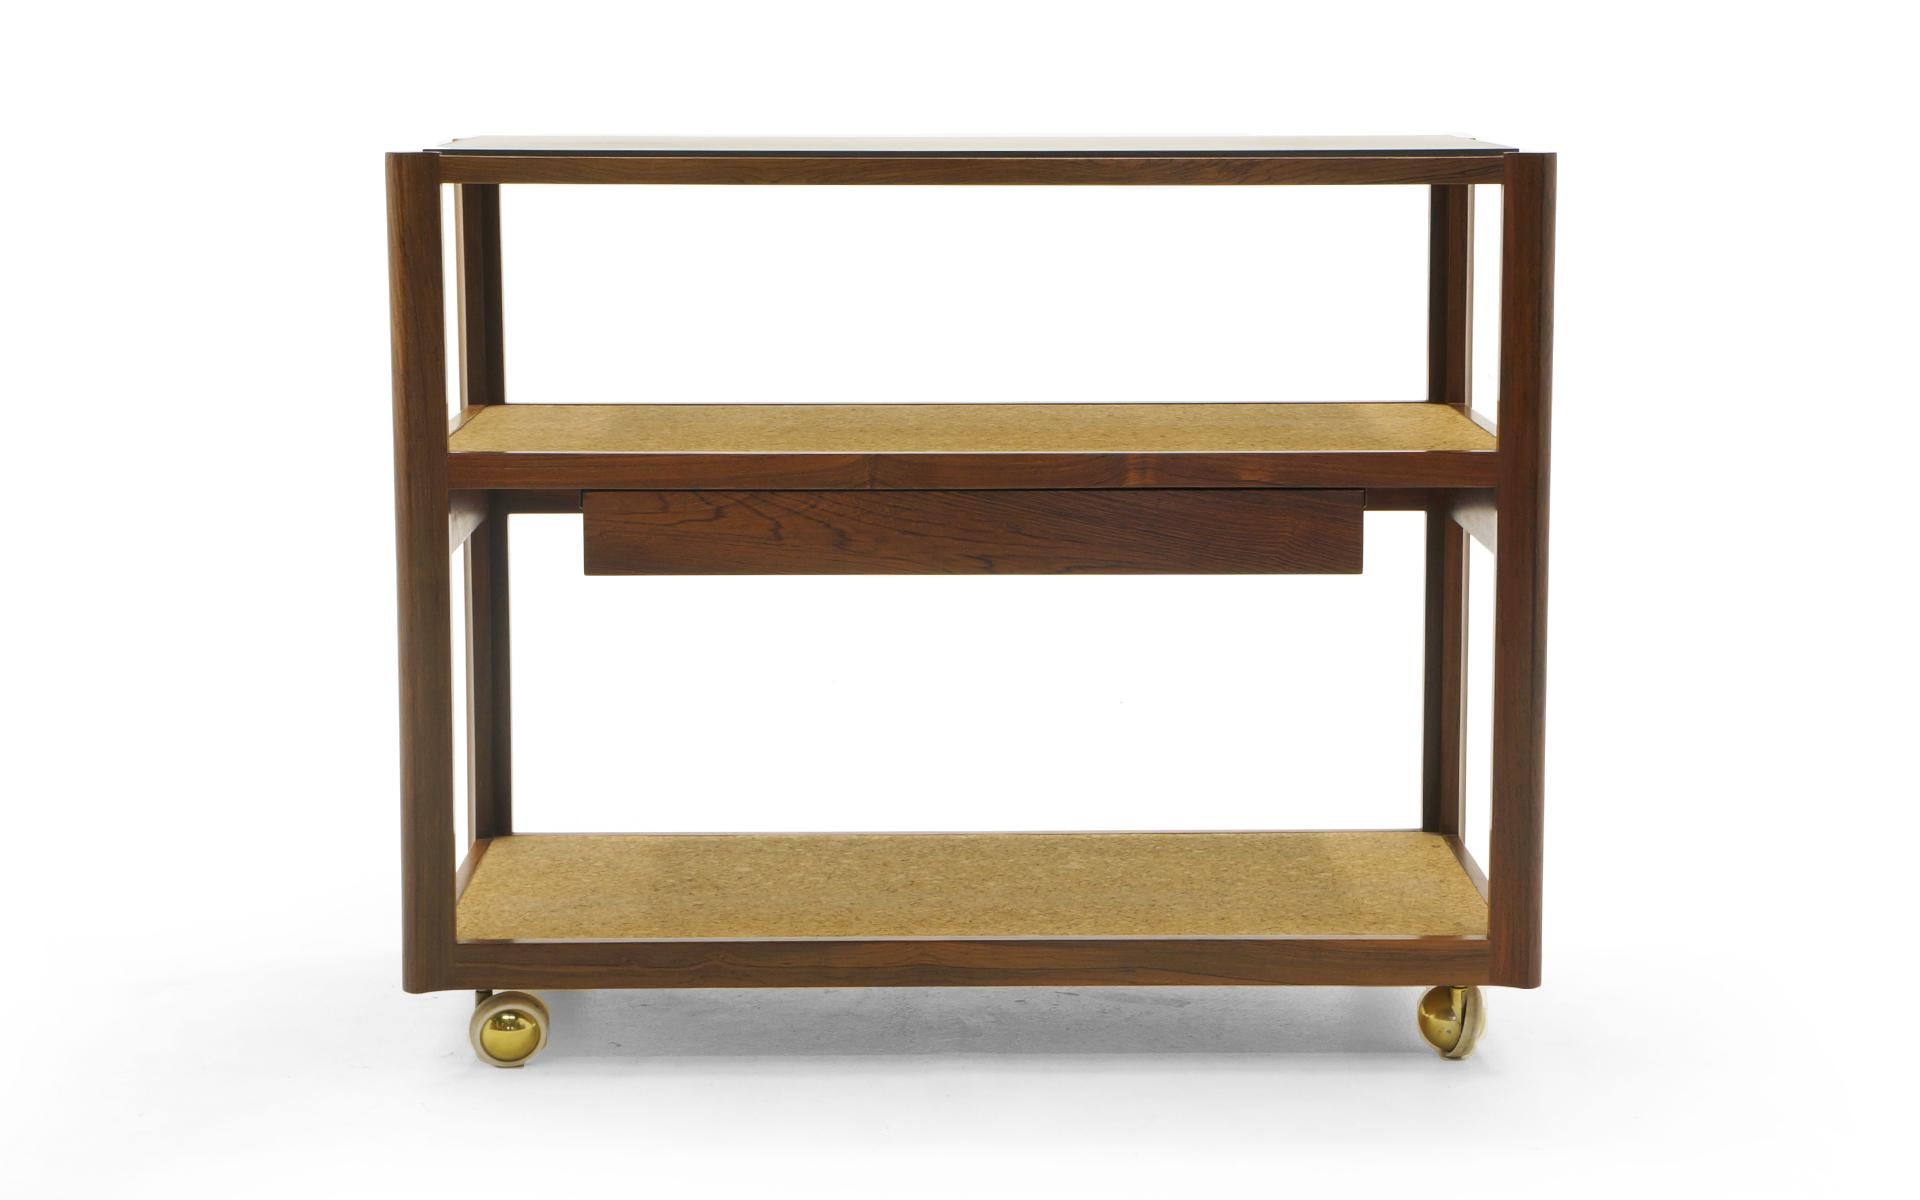 Edward Wormley for Dunbar serving cart or bar trolley with drawer on brass casters. Beautiful mix of materials: Sculpted Brazilian rosewood frame (see details in photos), shelves are cork covered, and the black slate top has been polished to virtual